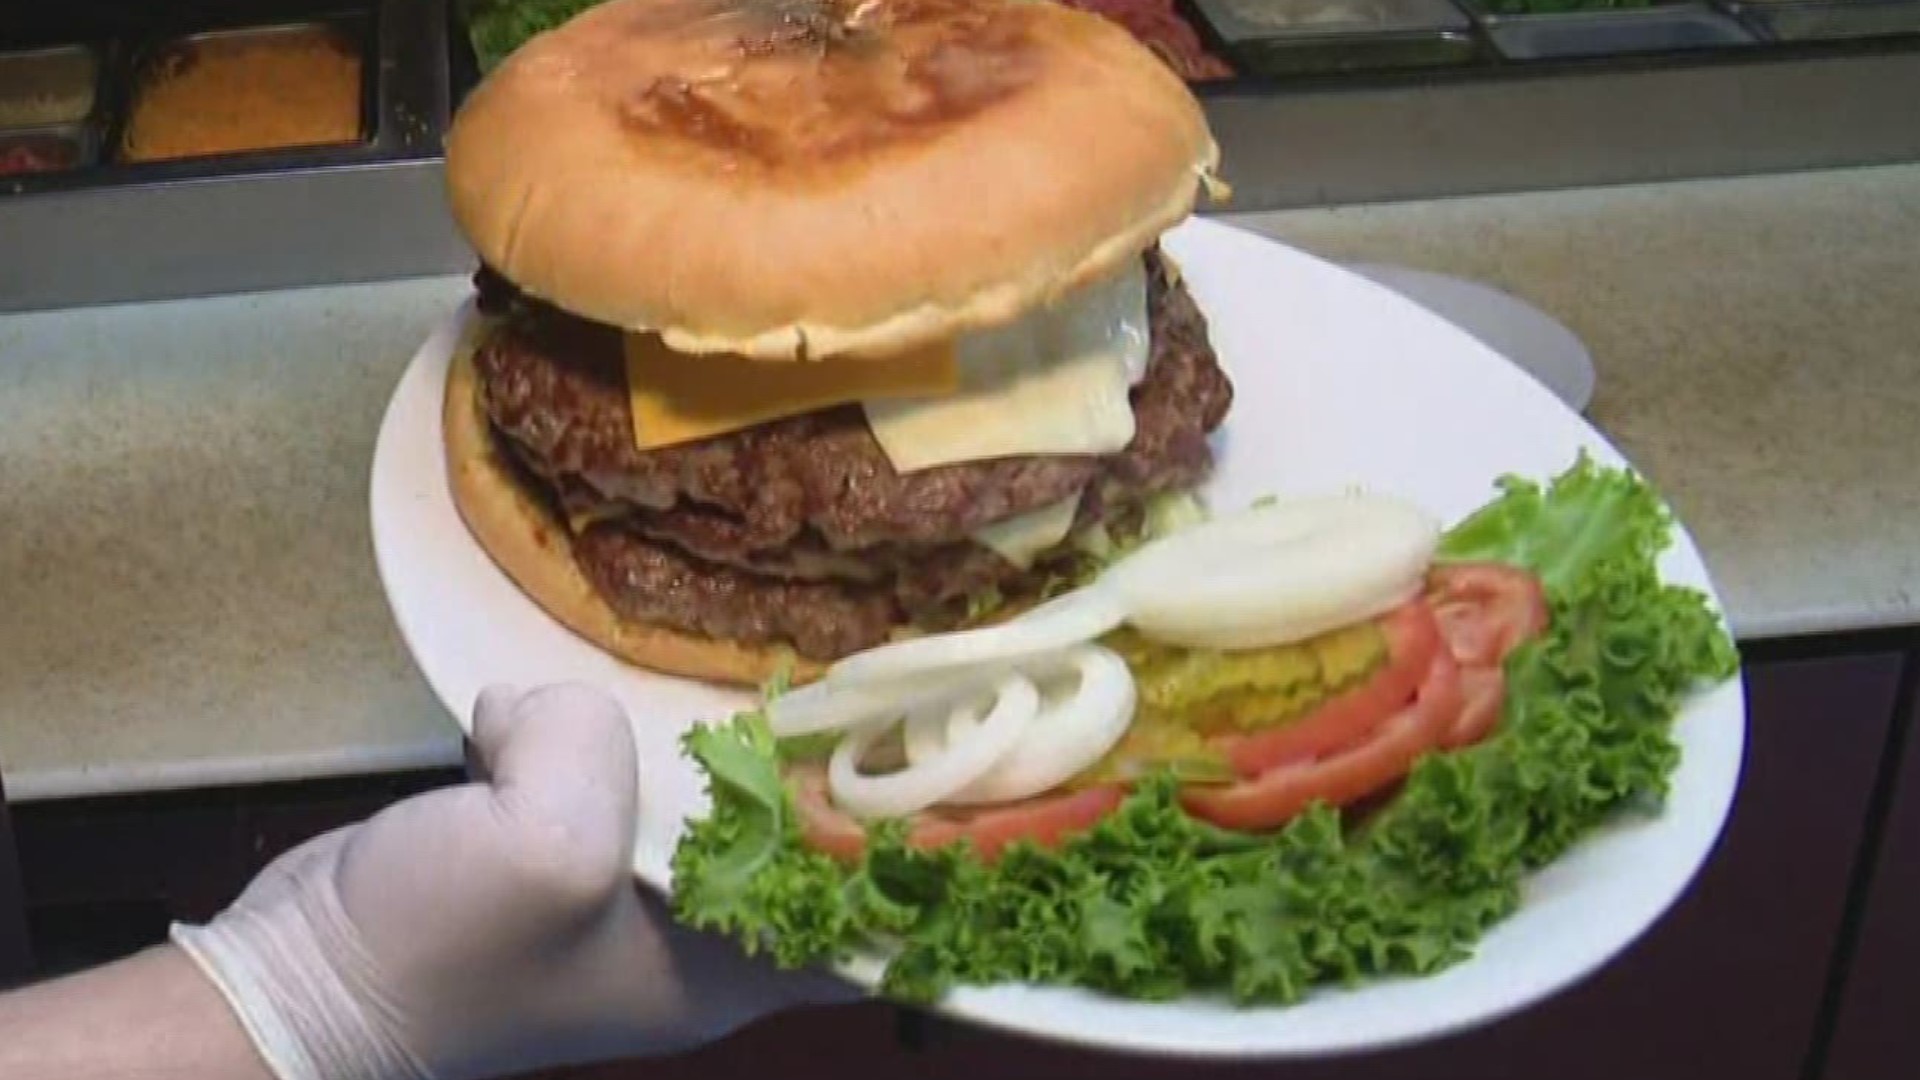 Today in St. Louis' Rene Knott took the burger  challenge at Uncle Linny's!